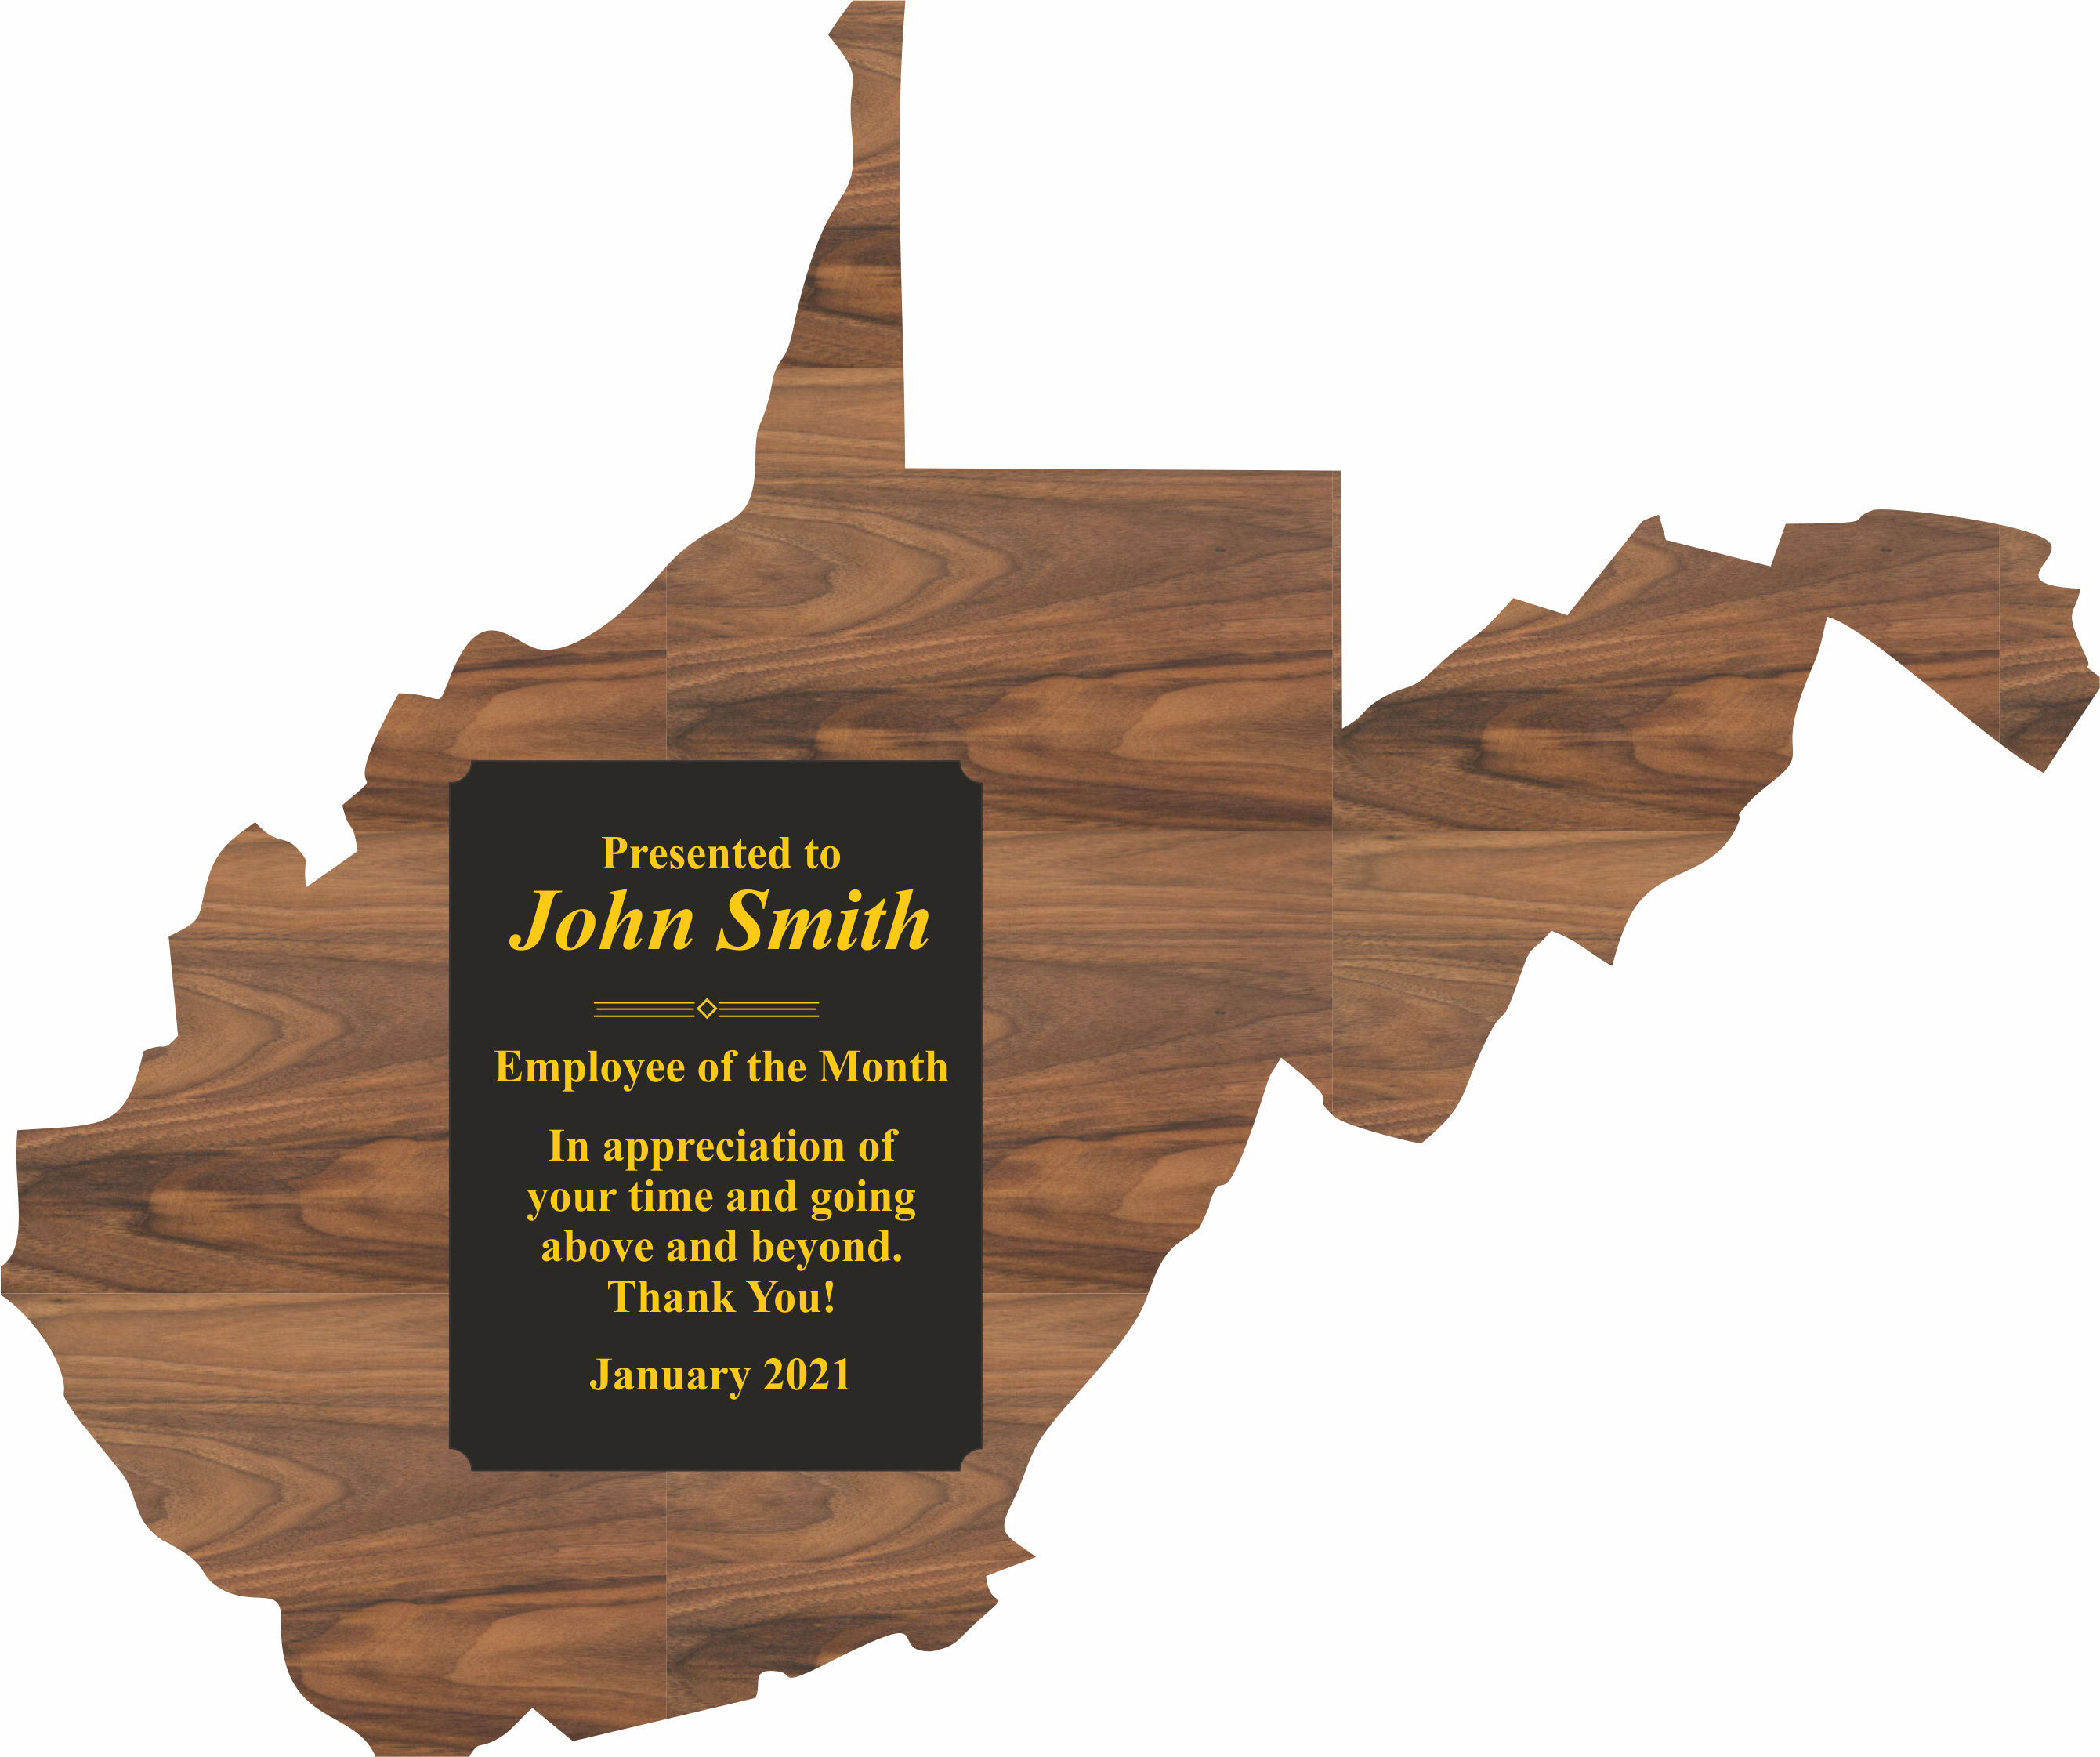 West Virginia State Shaped Plaques, Custom Engraved With Your Logo!